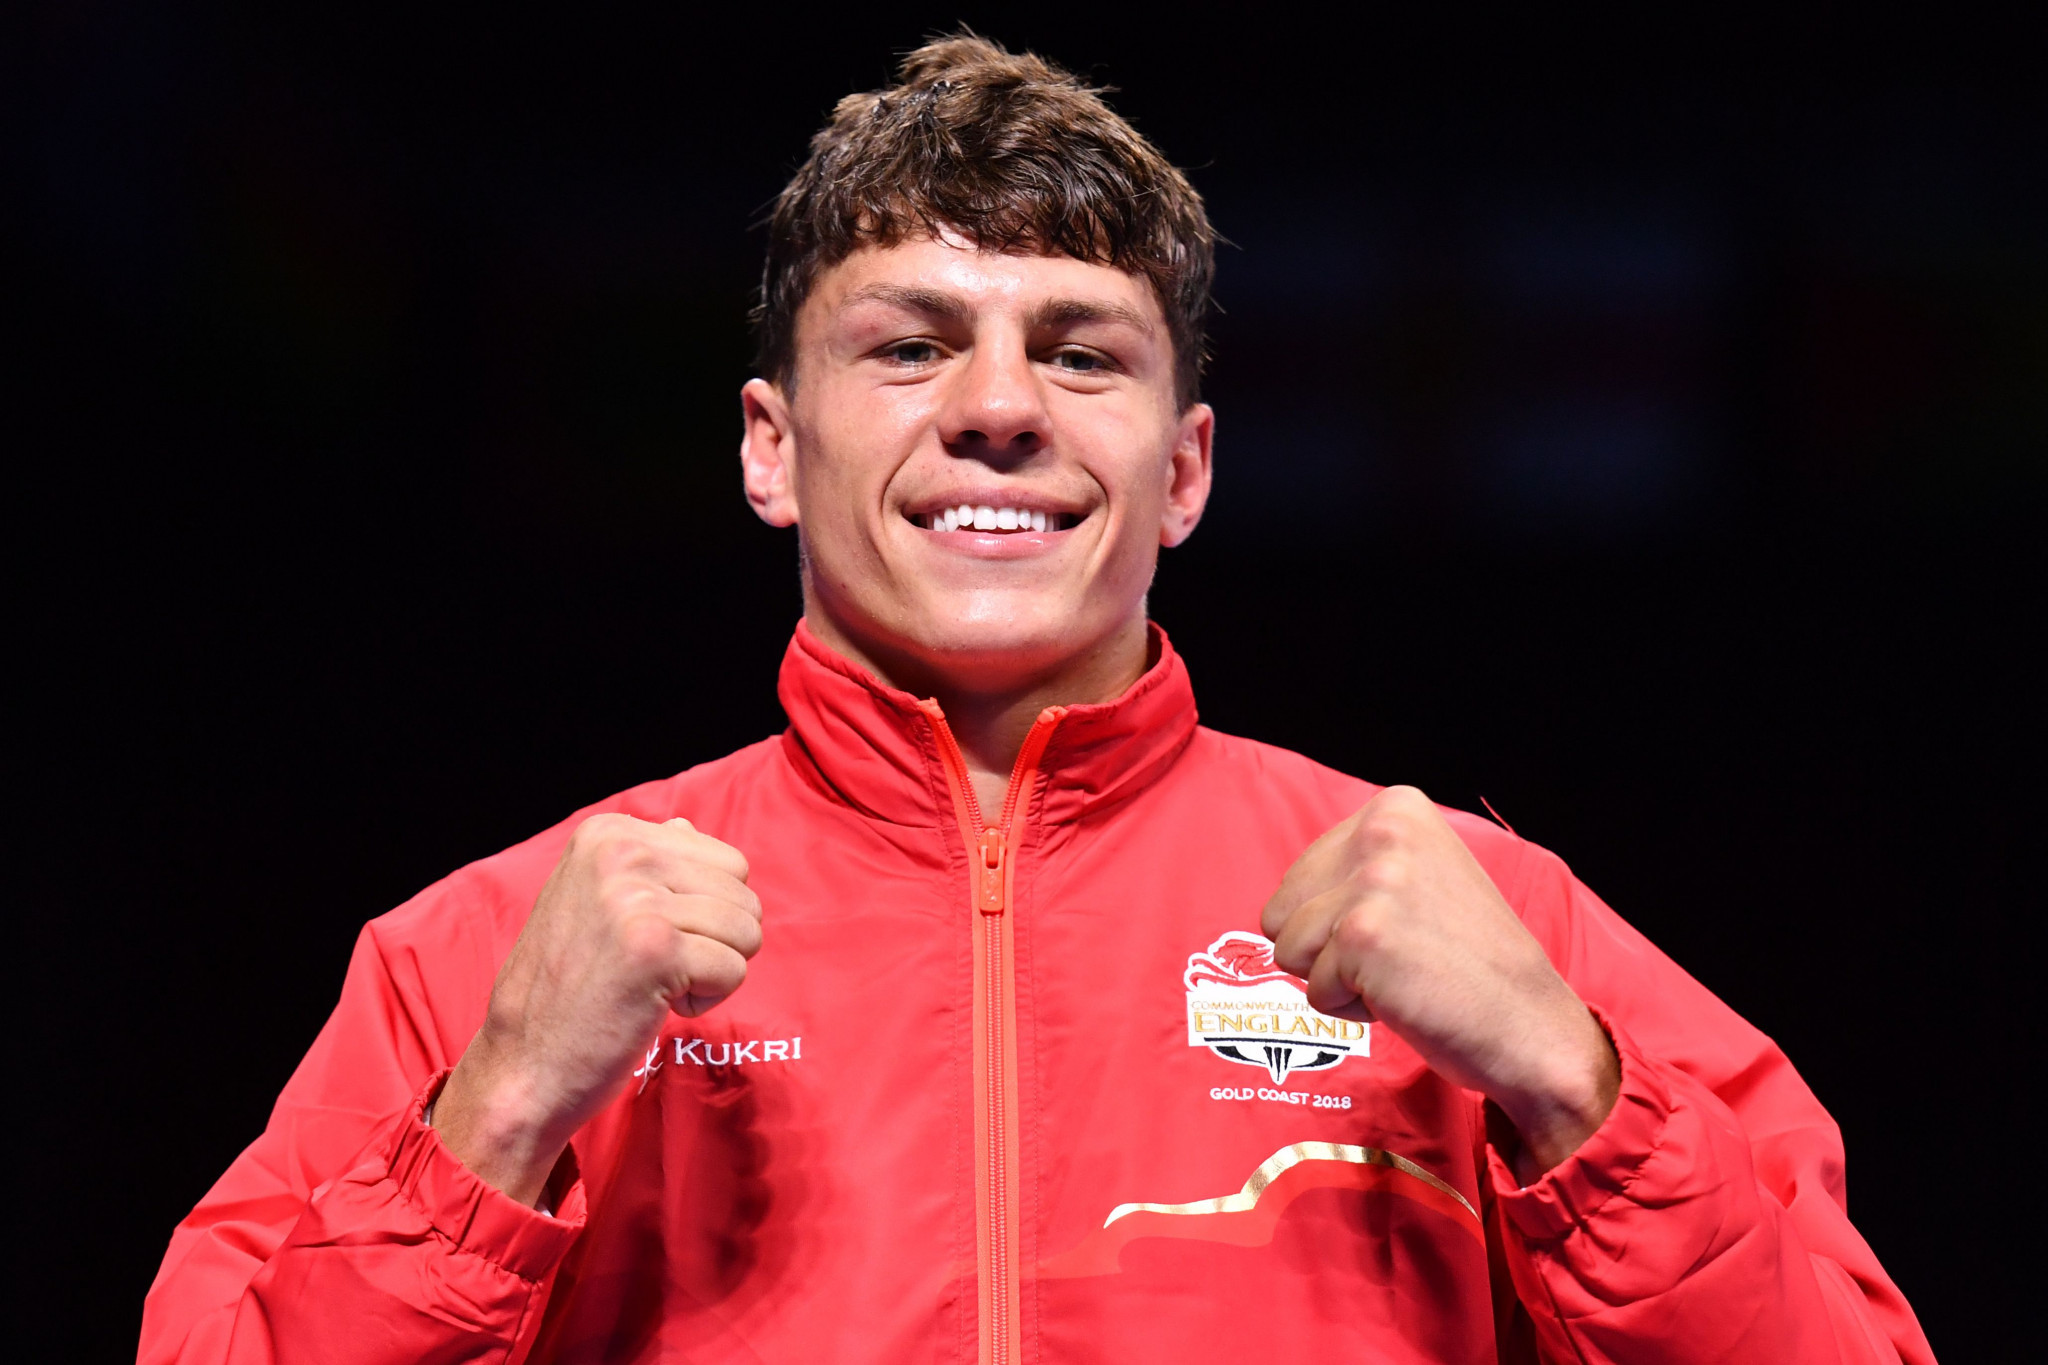 Sunderland boxer Pat McCormack won a Commonwealth Games gold medal at Gold Coast 2018 ©Getty Images